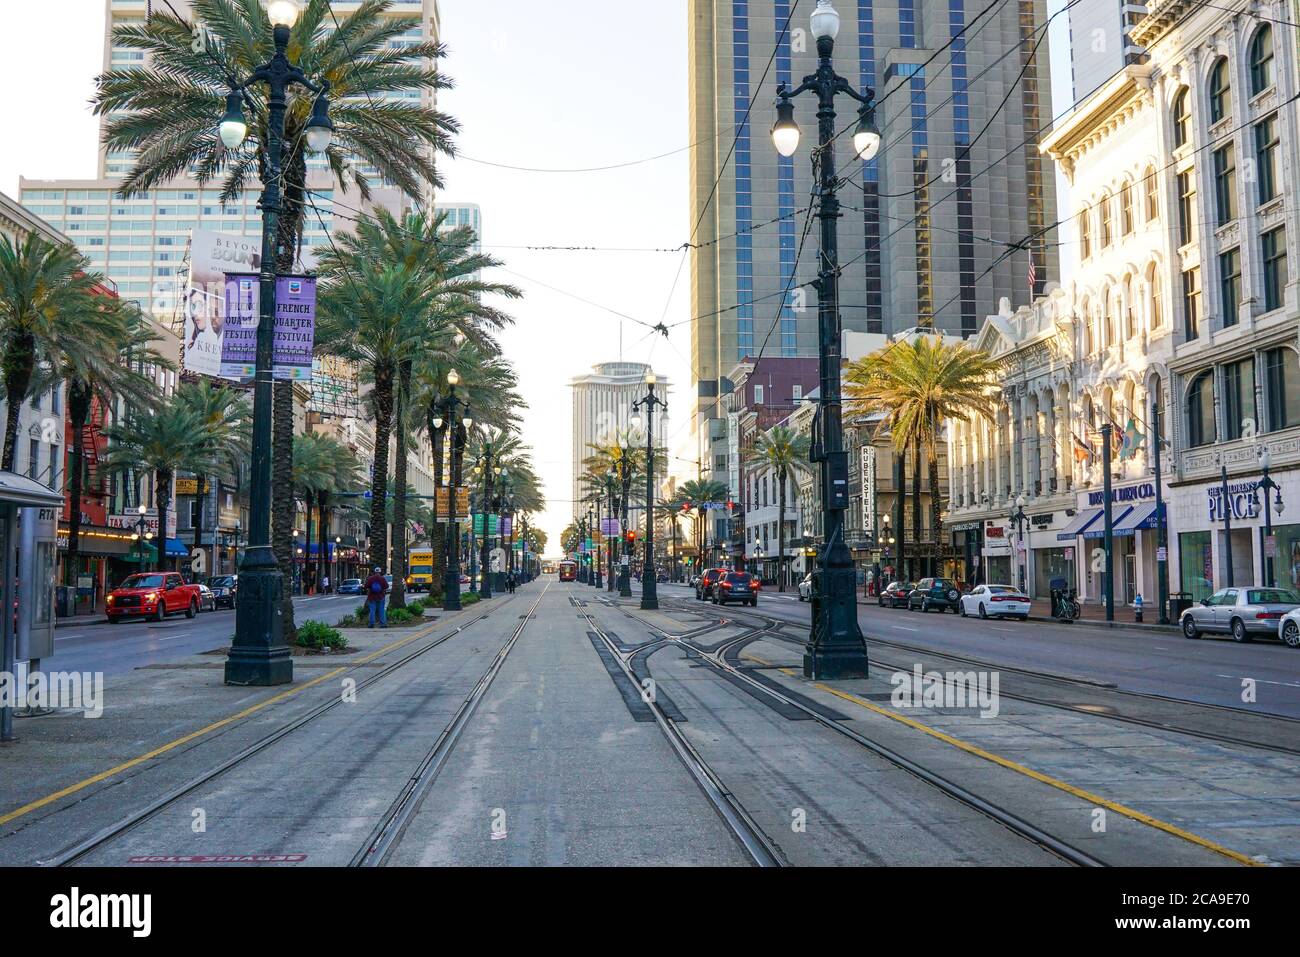 New Orleans - 04/15/2018 : prospect of Canal street with tram rails Stock Photo